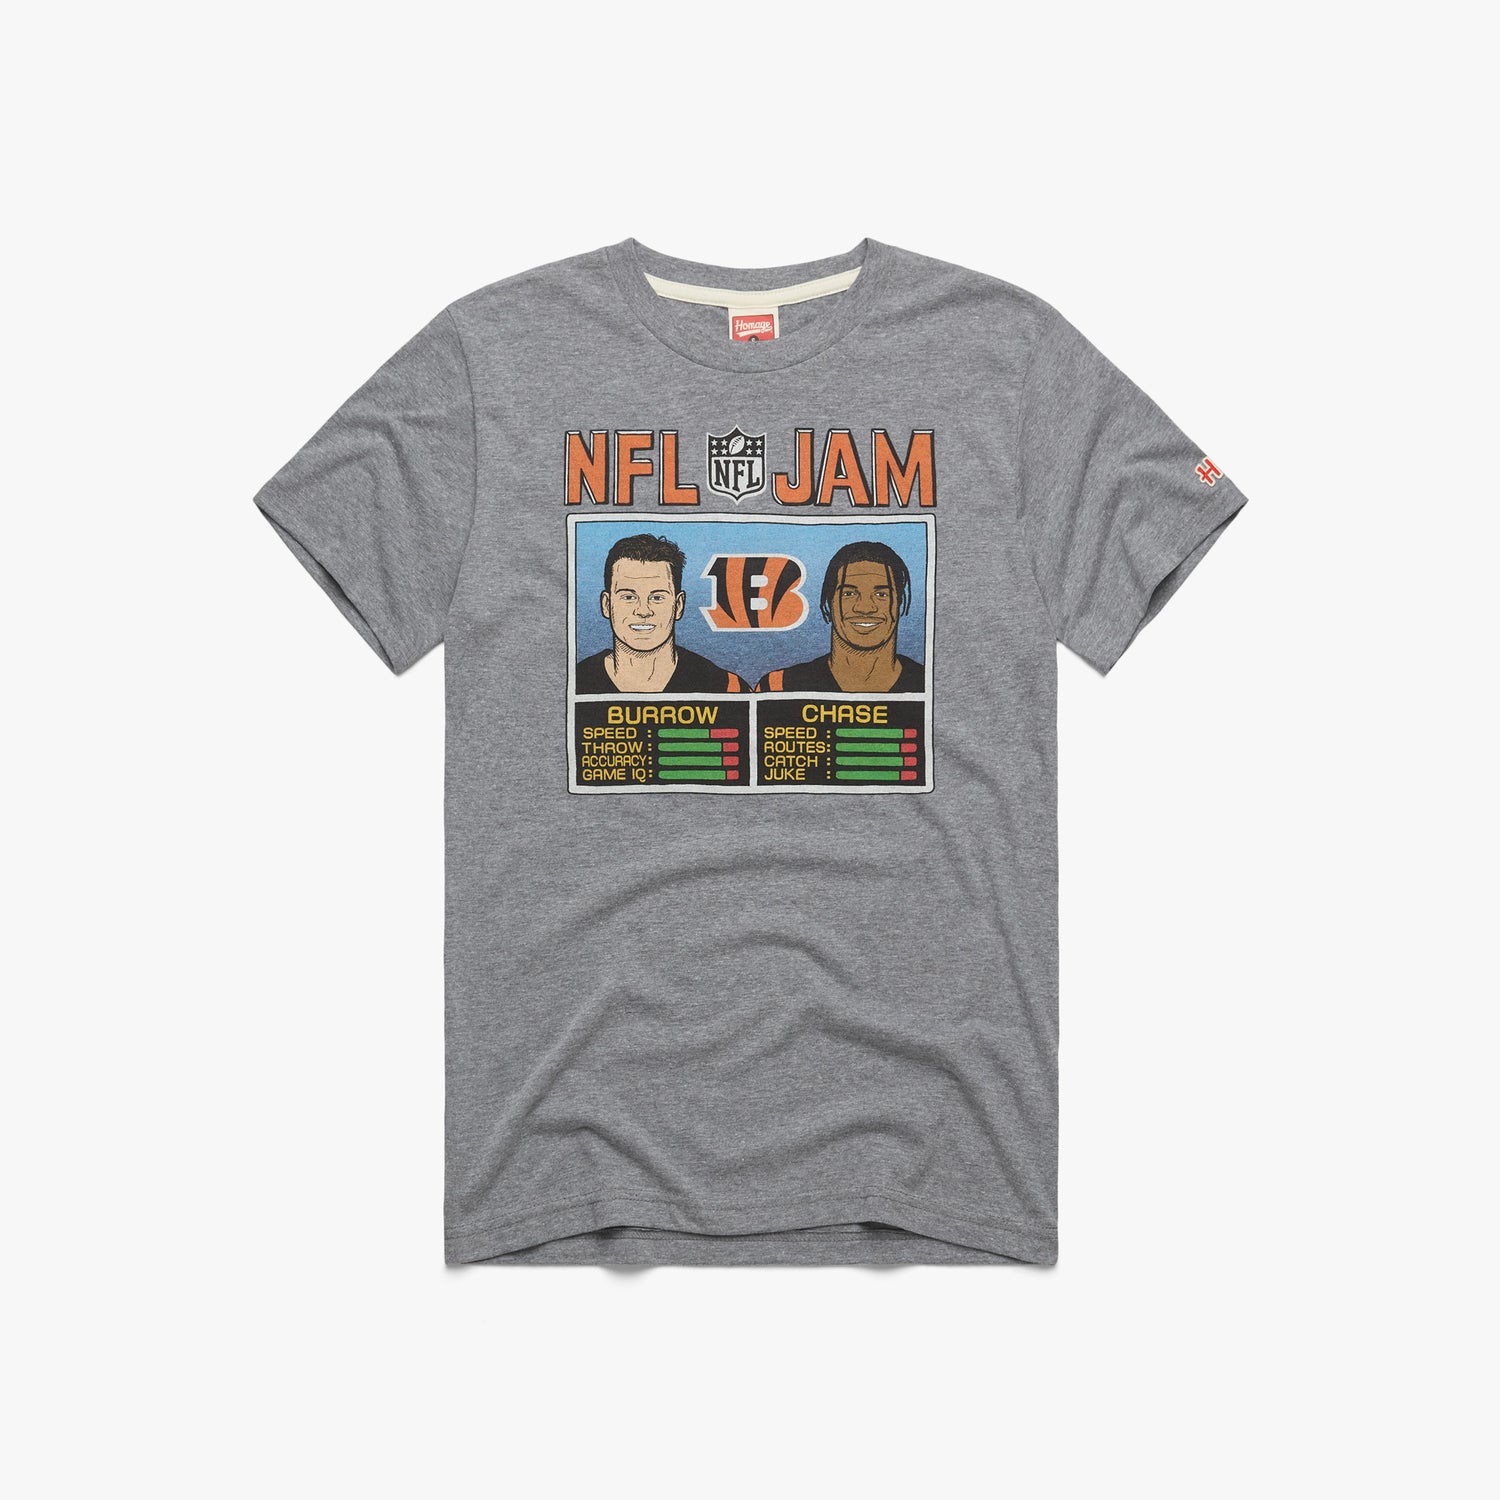 NFL Jam Cincinnati Bengals Burrow and Chase T-Shirt from Homage. | Officially Licensed Vintage NFL Apparel from Homage Pro Shop.